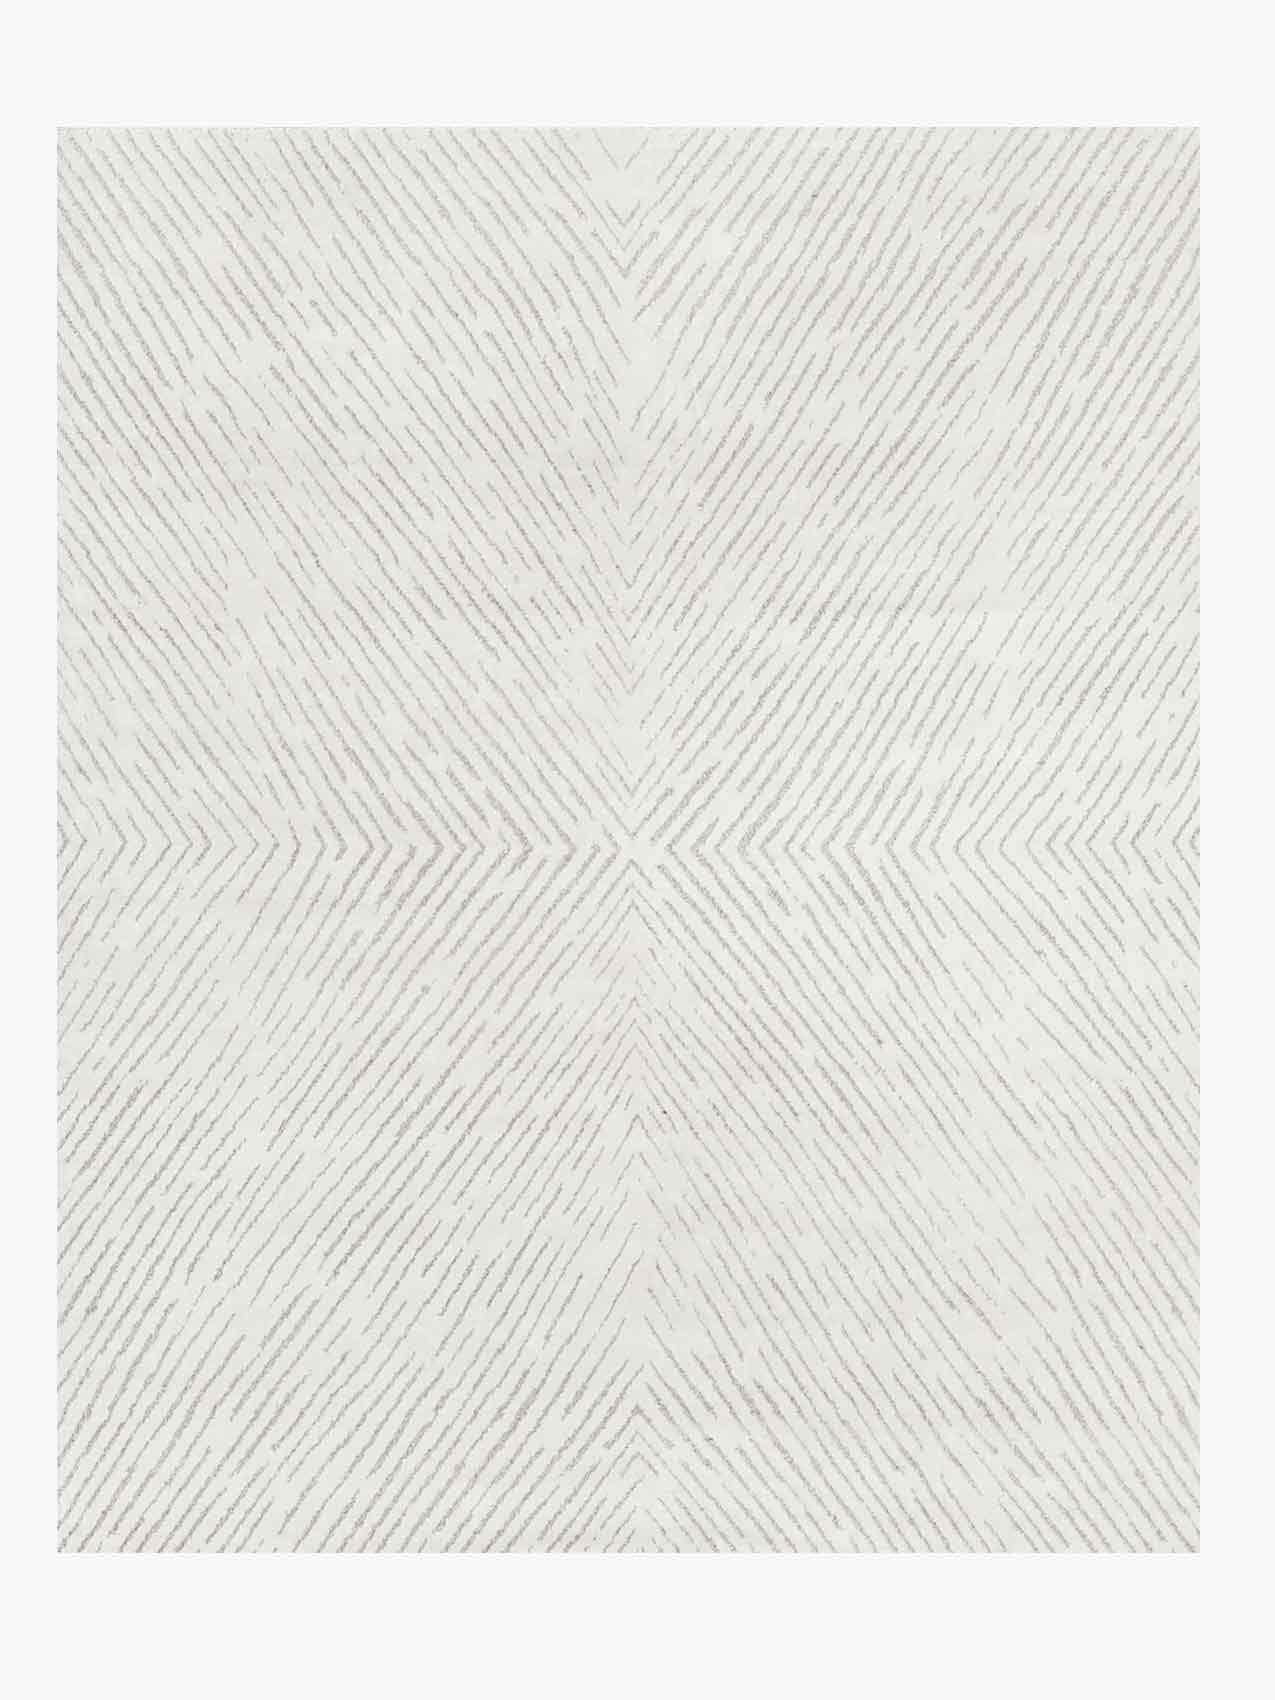 For Sale: Beige (Sand/Taupe) Ben Soleimani Performance Setta Rug– Handknotted Soft Pile Nickel/Carbon 10'x14'